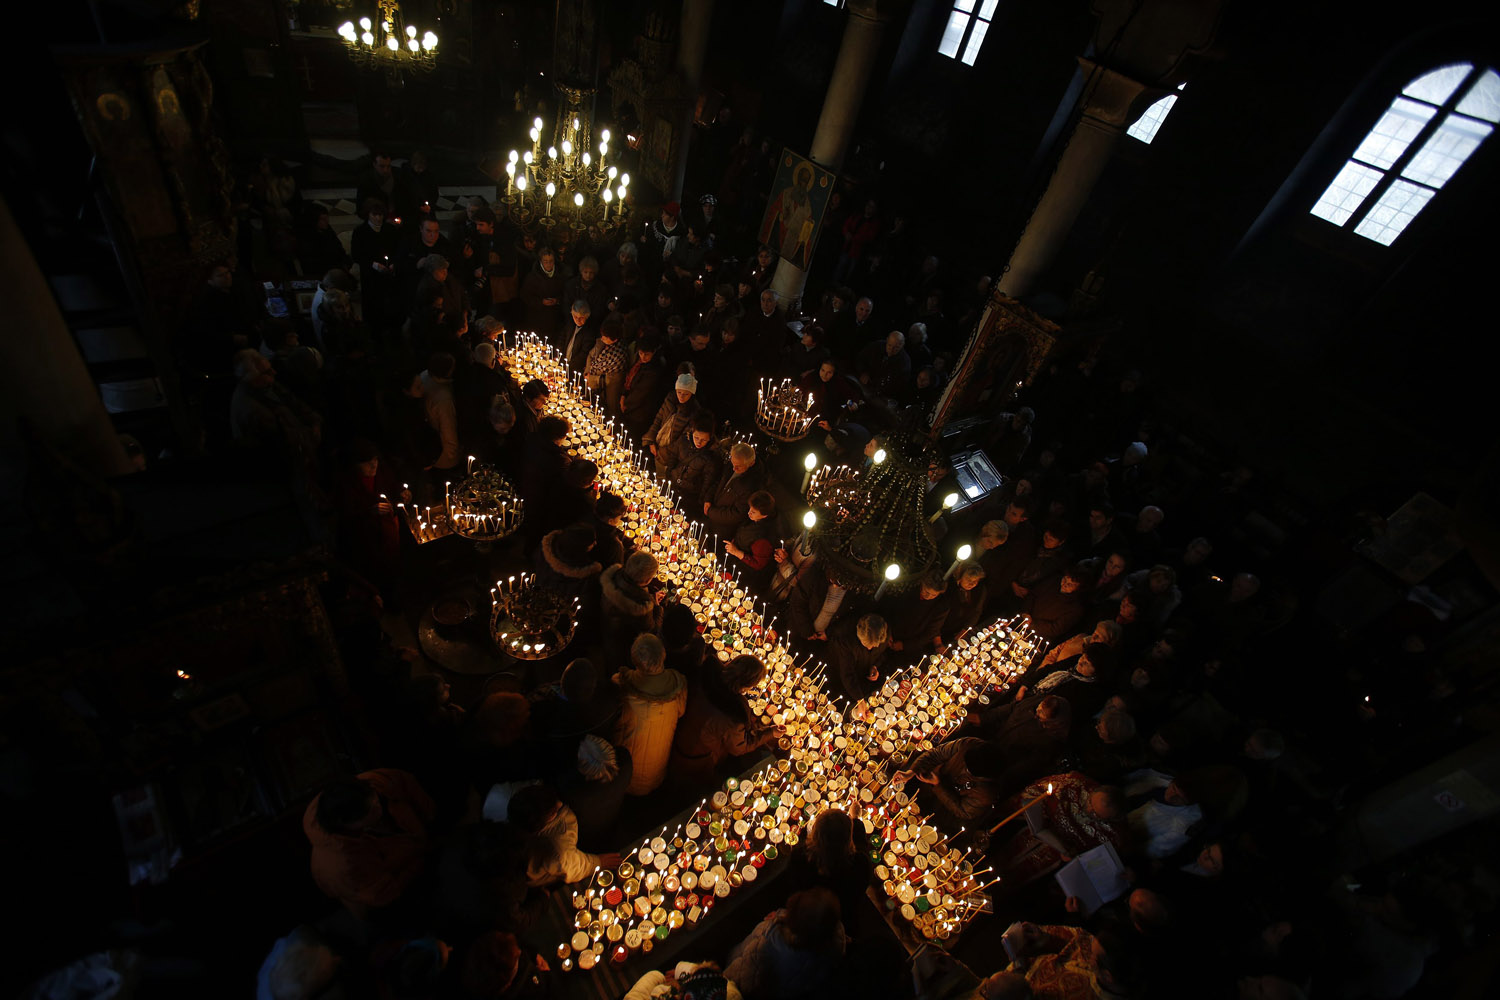 Worshippers gather around candles stuck to jars with honey, during a religious mass in the church of the Presentation of the Blessed Virgin in the city of Blagoevgrad